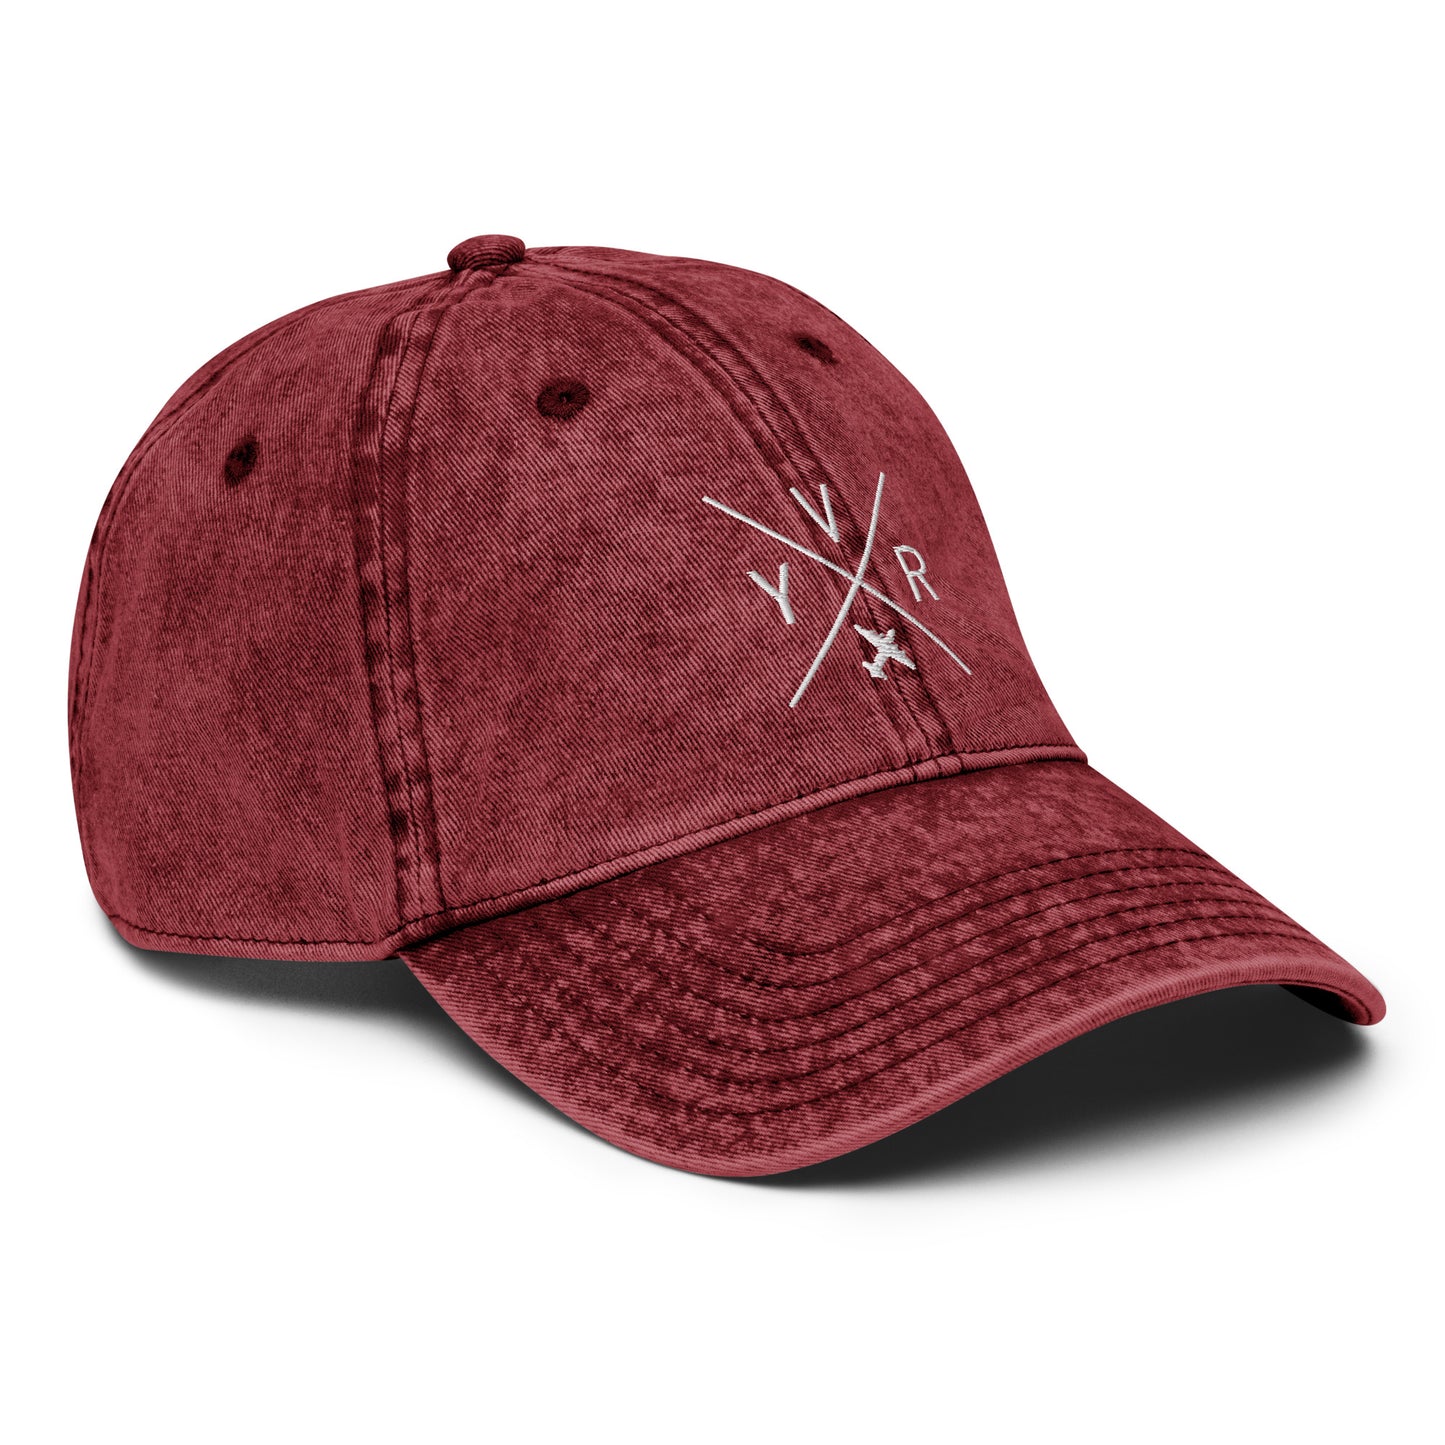 Crossed-X Cotton Twill Cap - White • YVR Vancouver • YHM Designs - Image 24